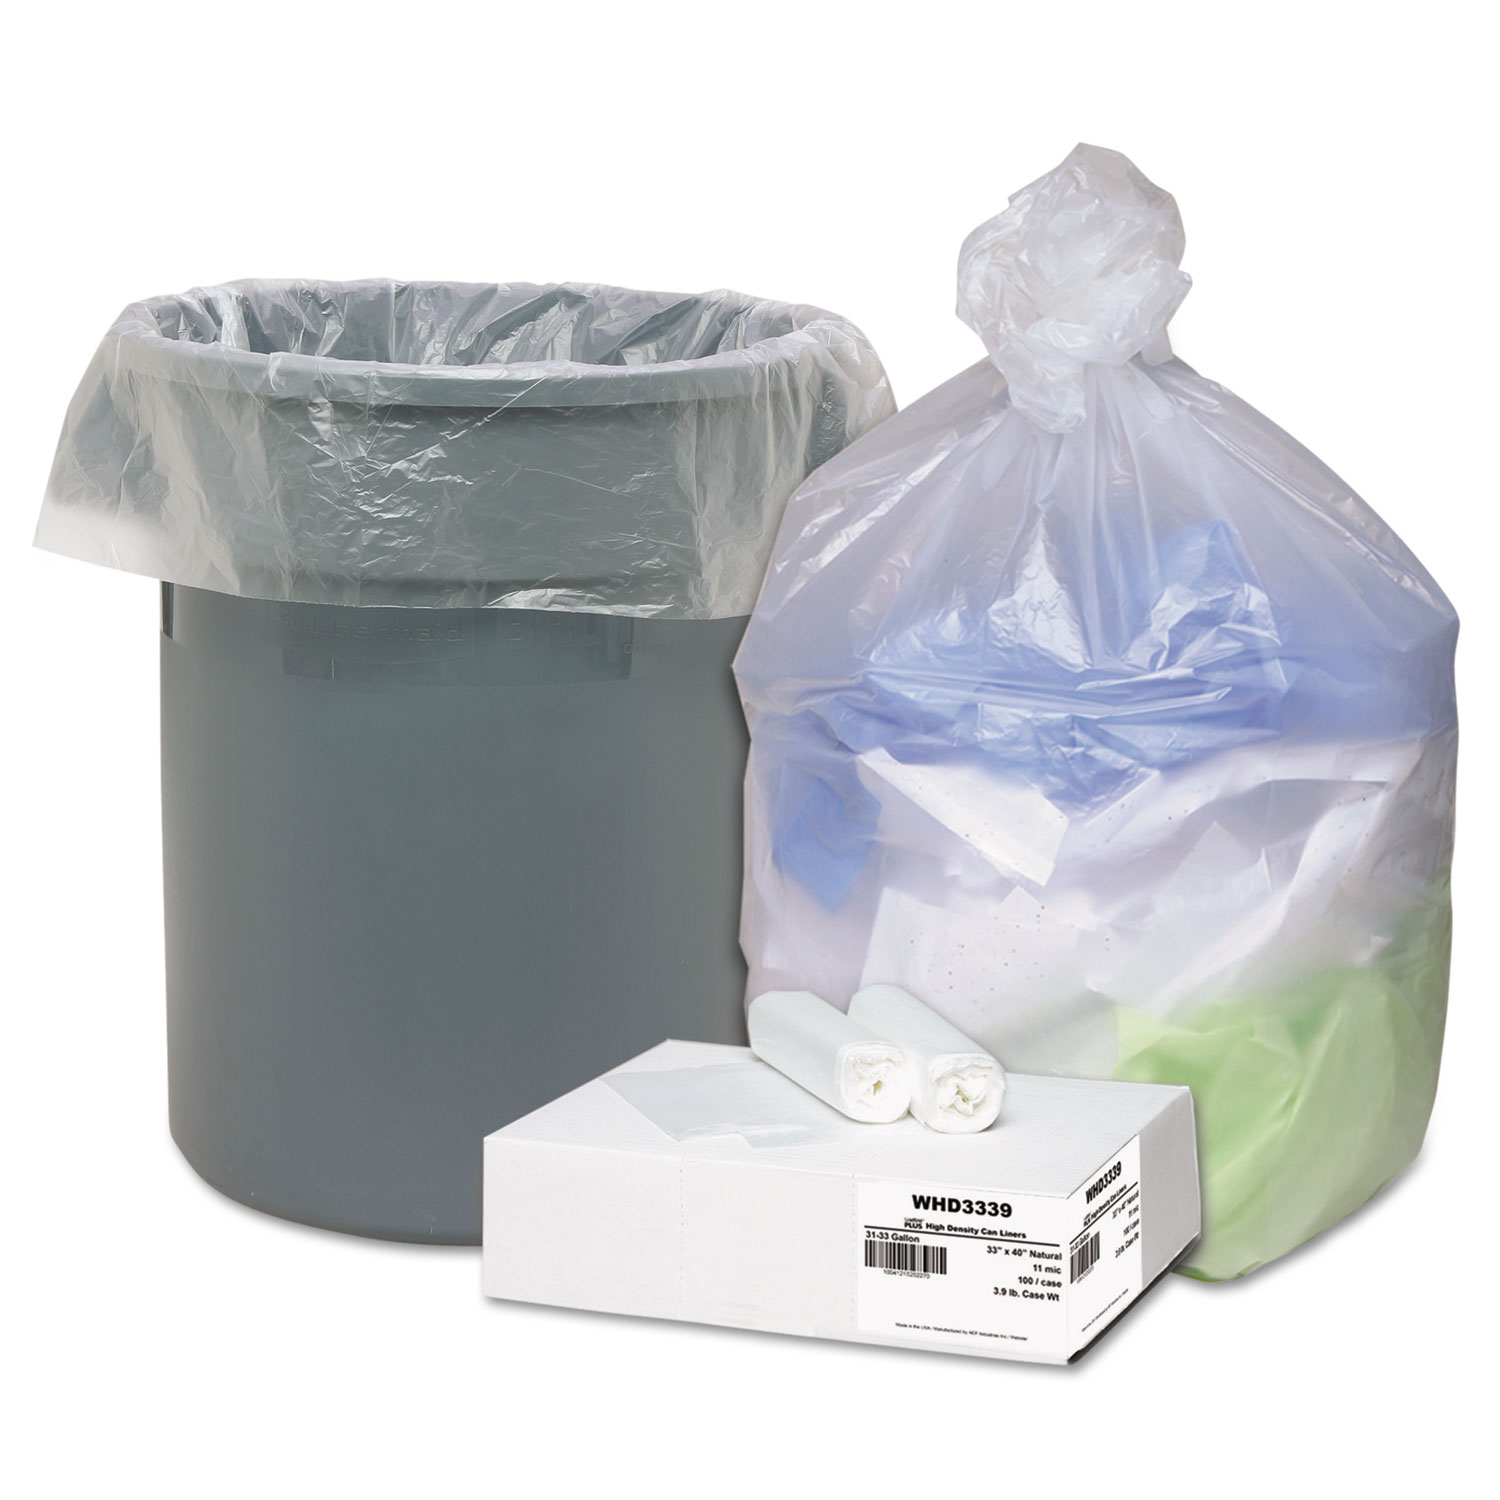 Red Trash Bags, 31-33 Gallon 100 / Case 1.5 Mil